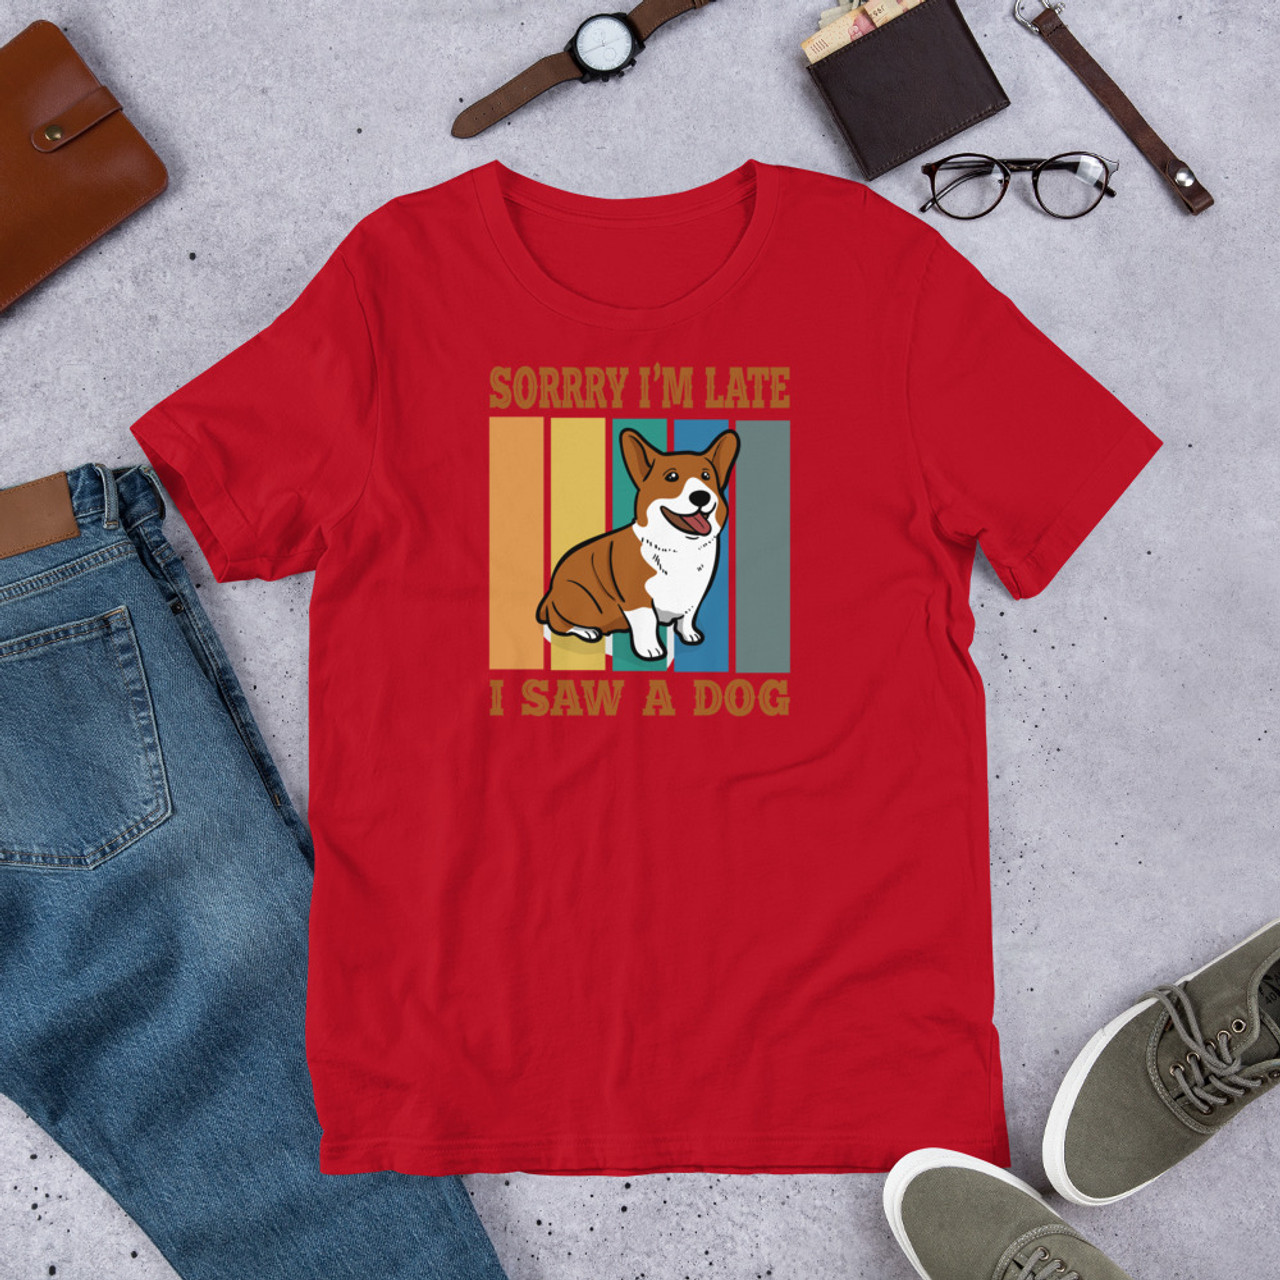 Red T-Shirt - Bella + Canvas 3001 Sorry I'm Late I Saw A Dog